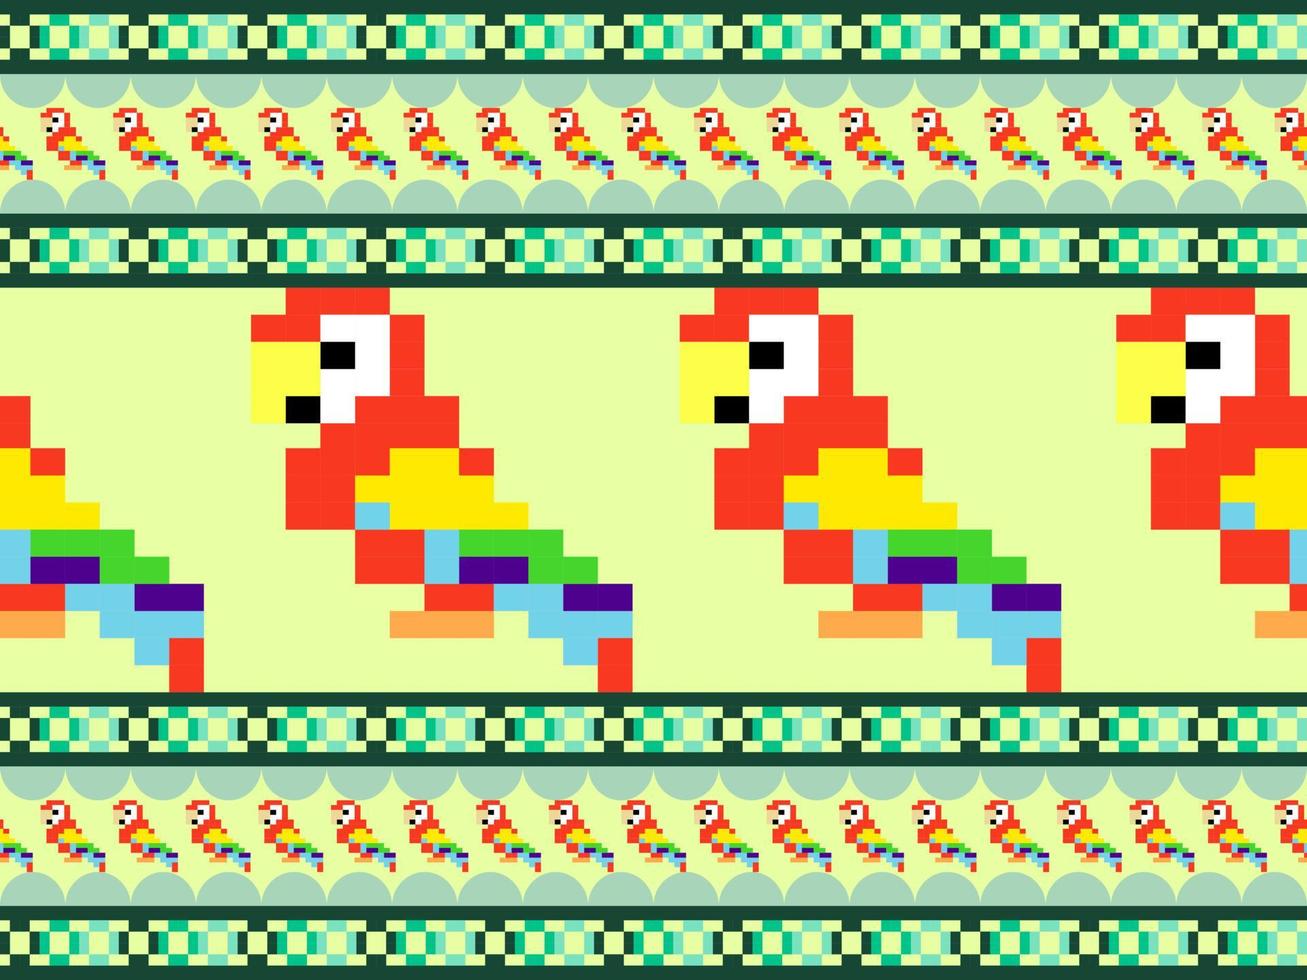 Parrot cartoon character seamless pattern on green background.Pixel style vector